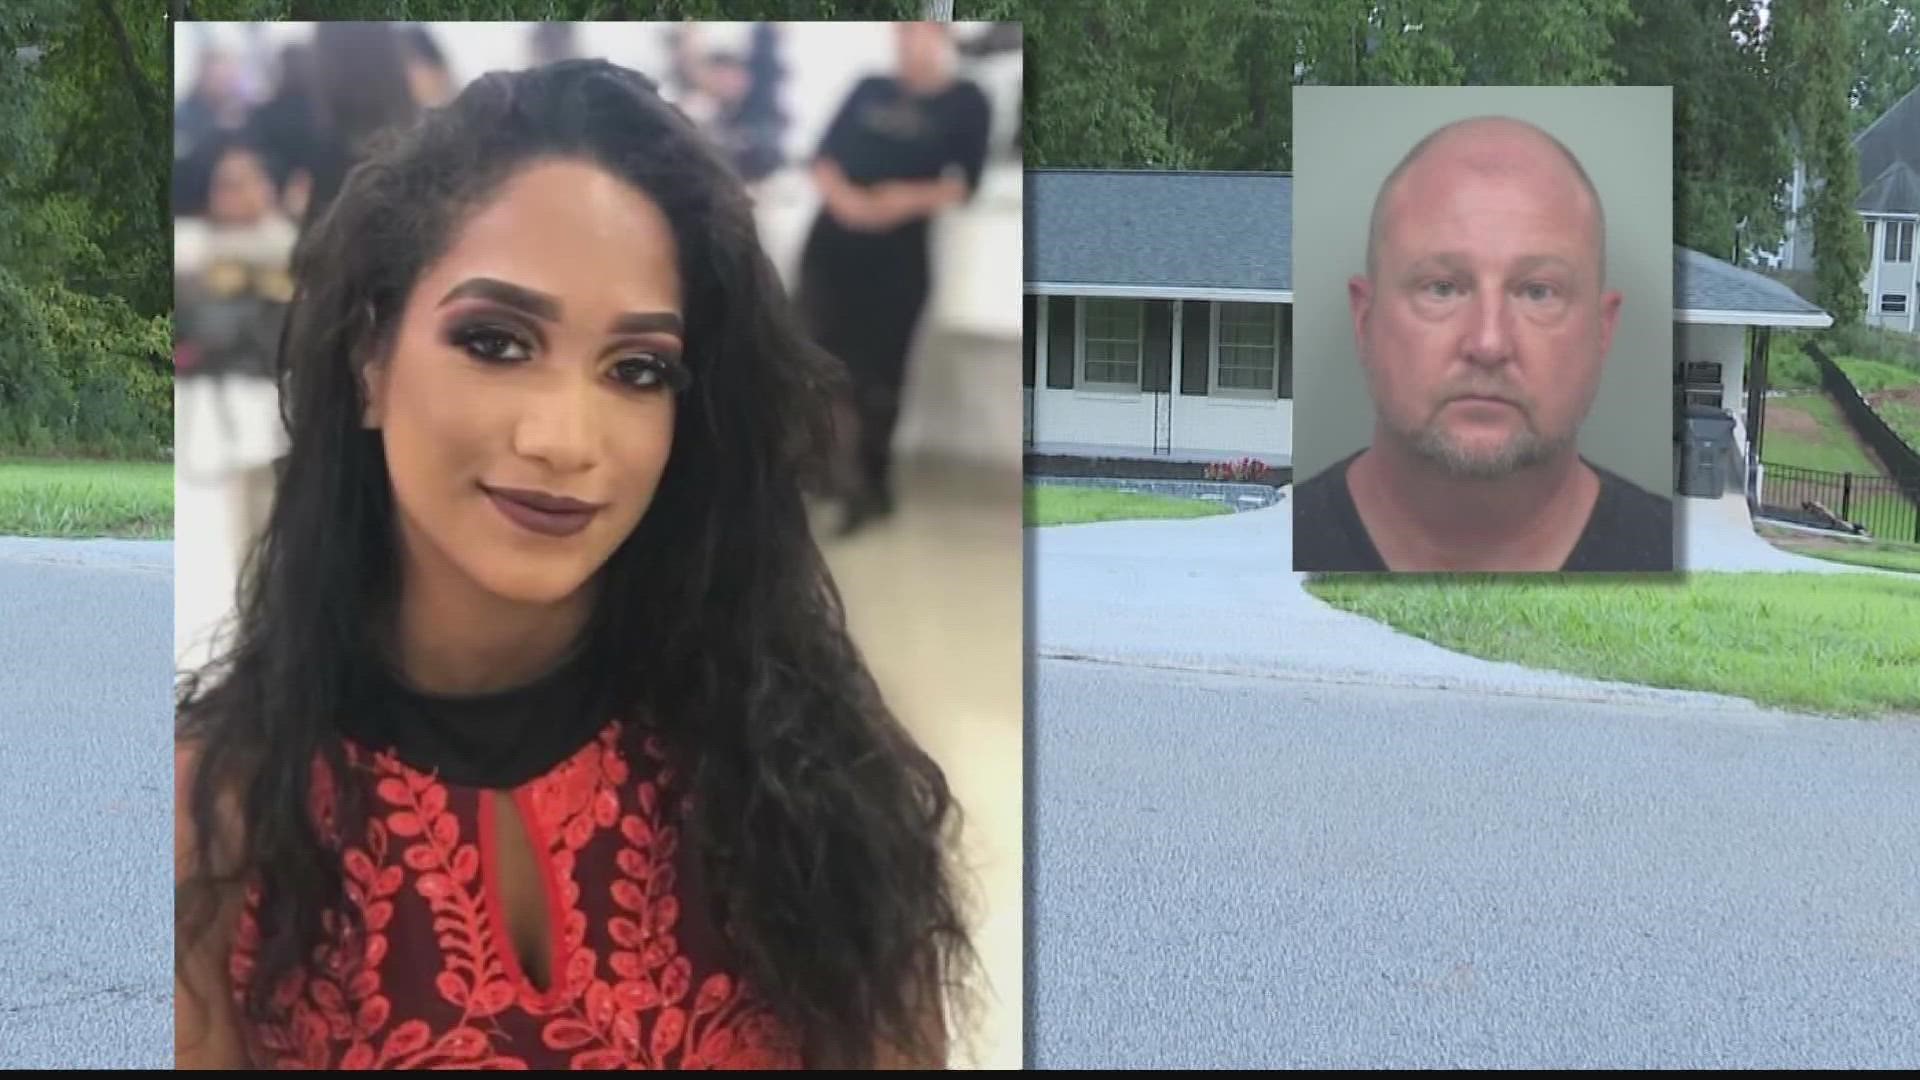 The Gwinnett County Police Department has arrested Timothy Krueger in connection with the murder of a 19-year-old Ecuadorian woman.